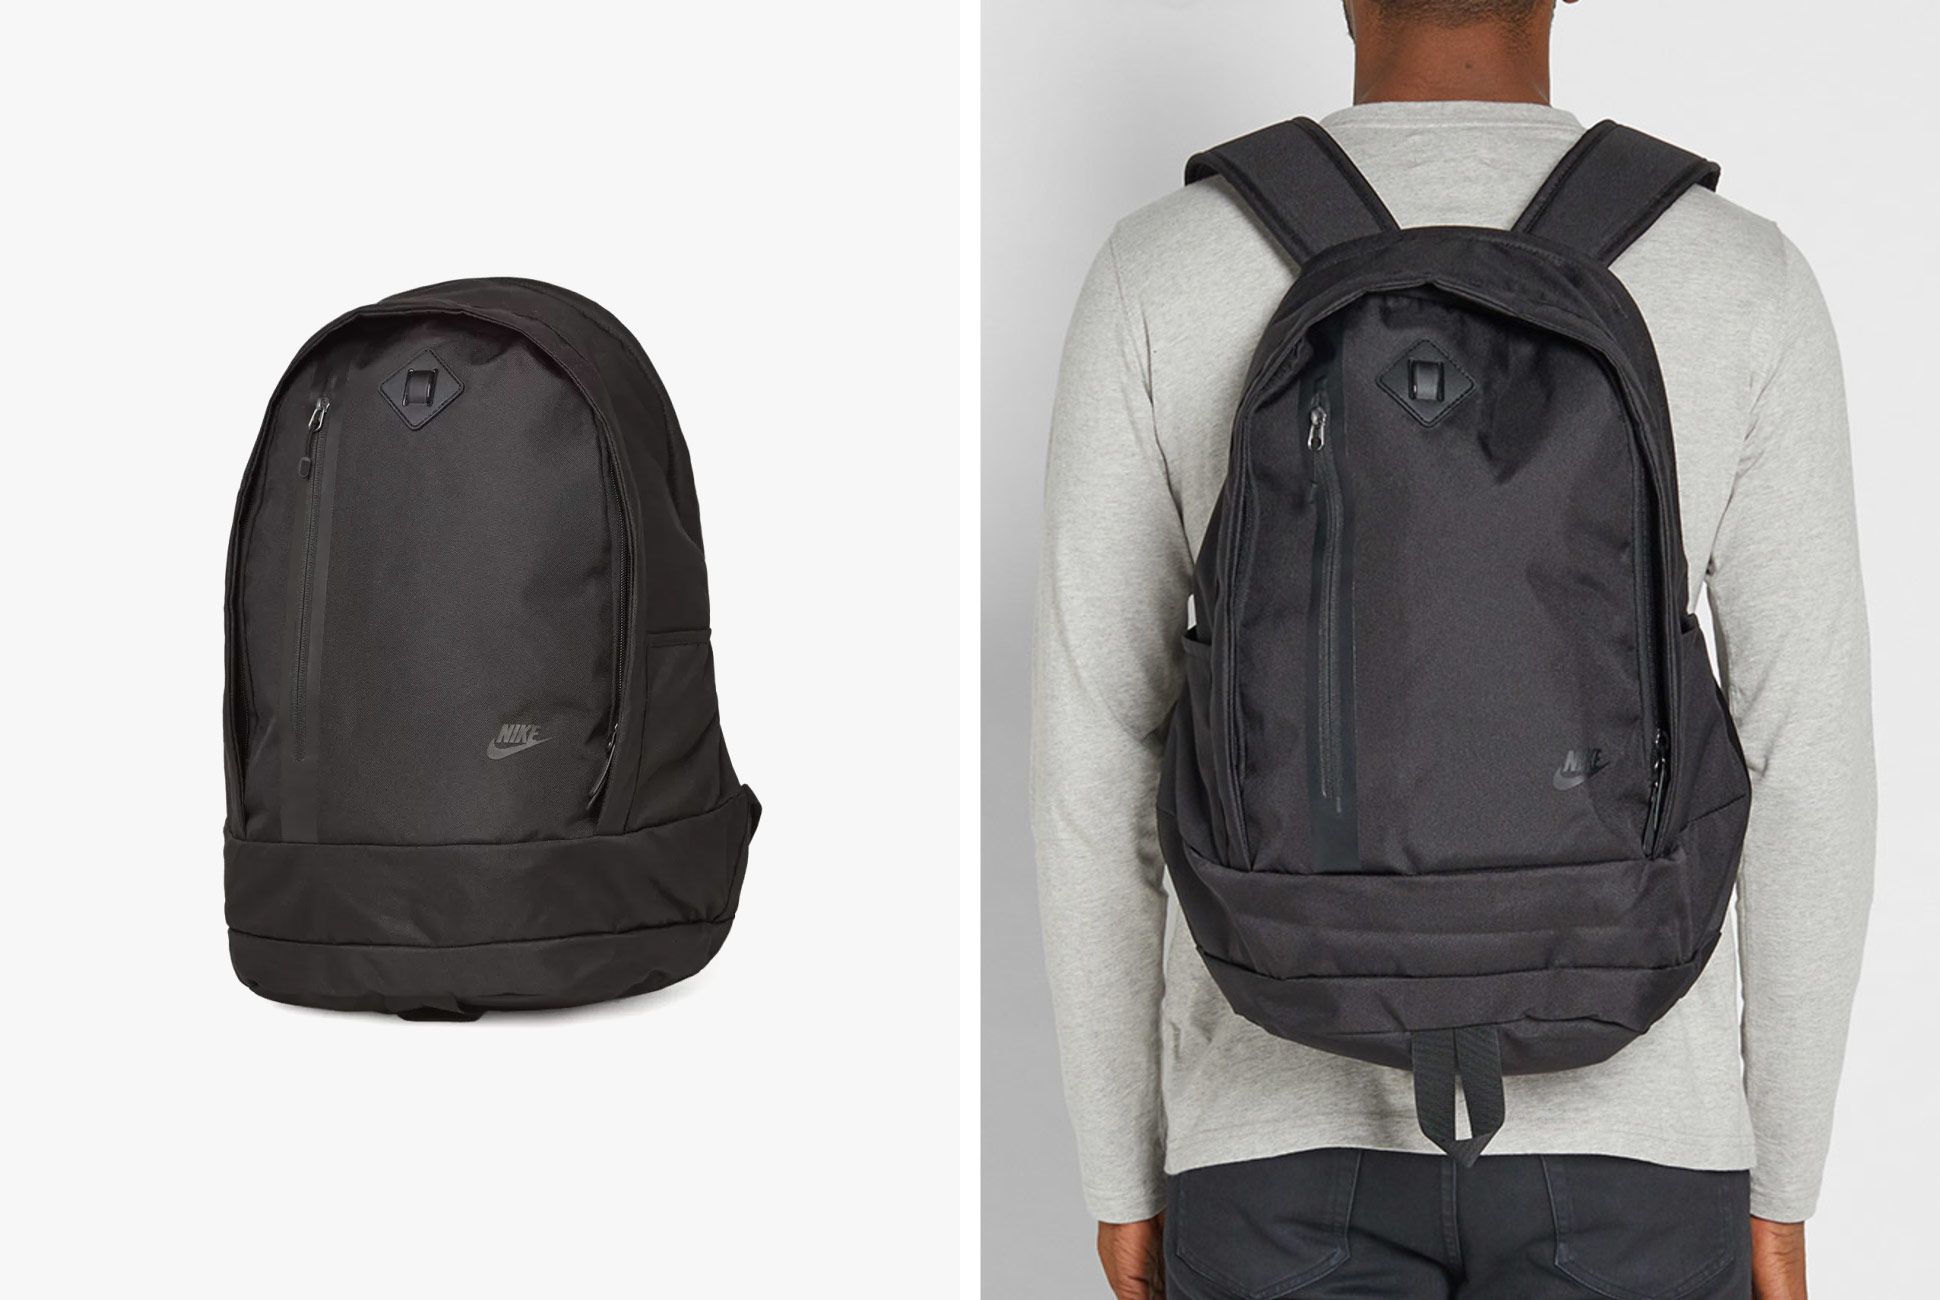 Get This Understated Black Backpack for 